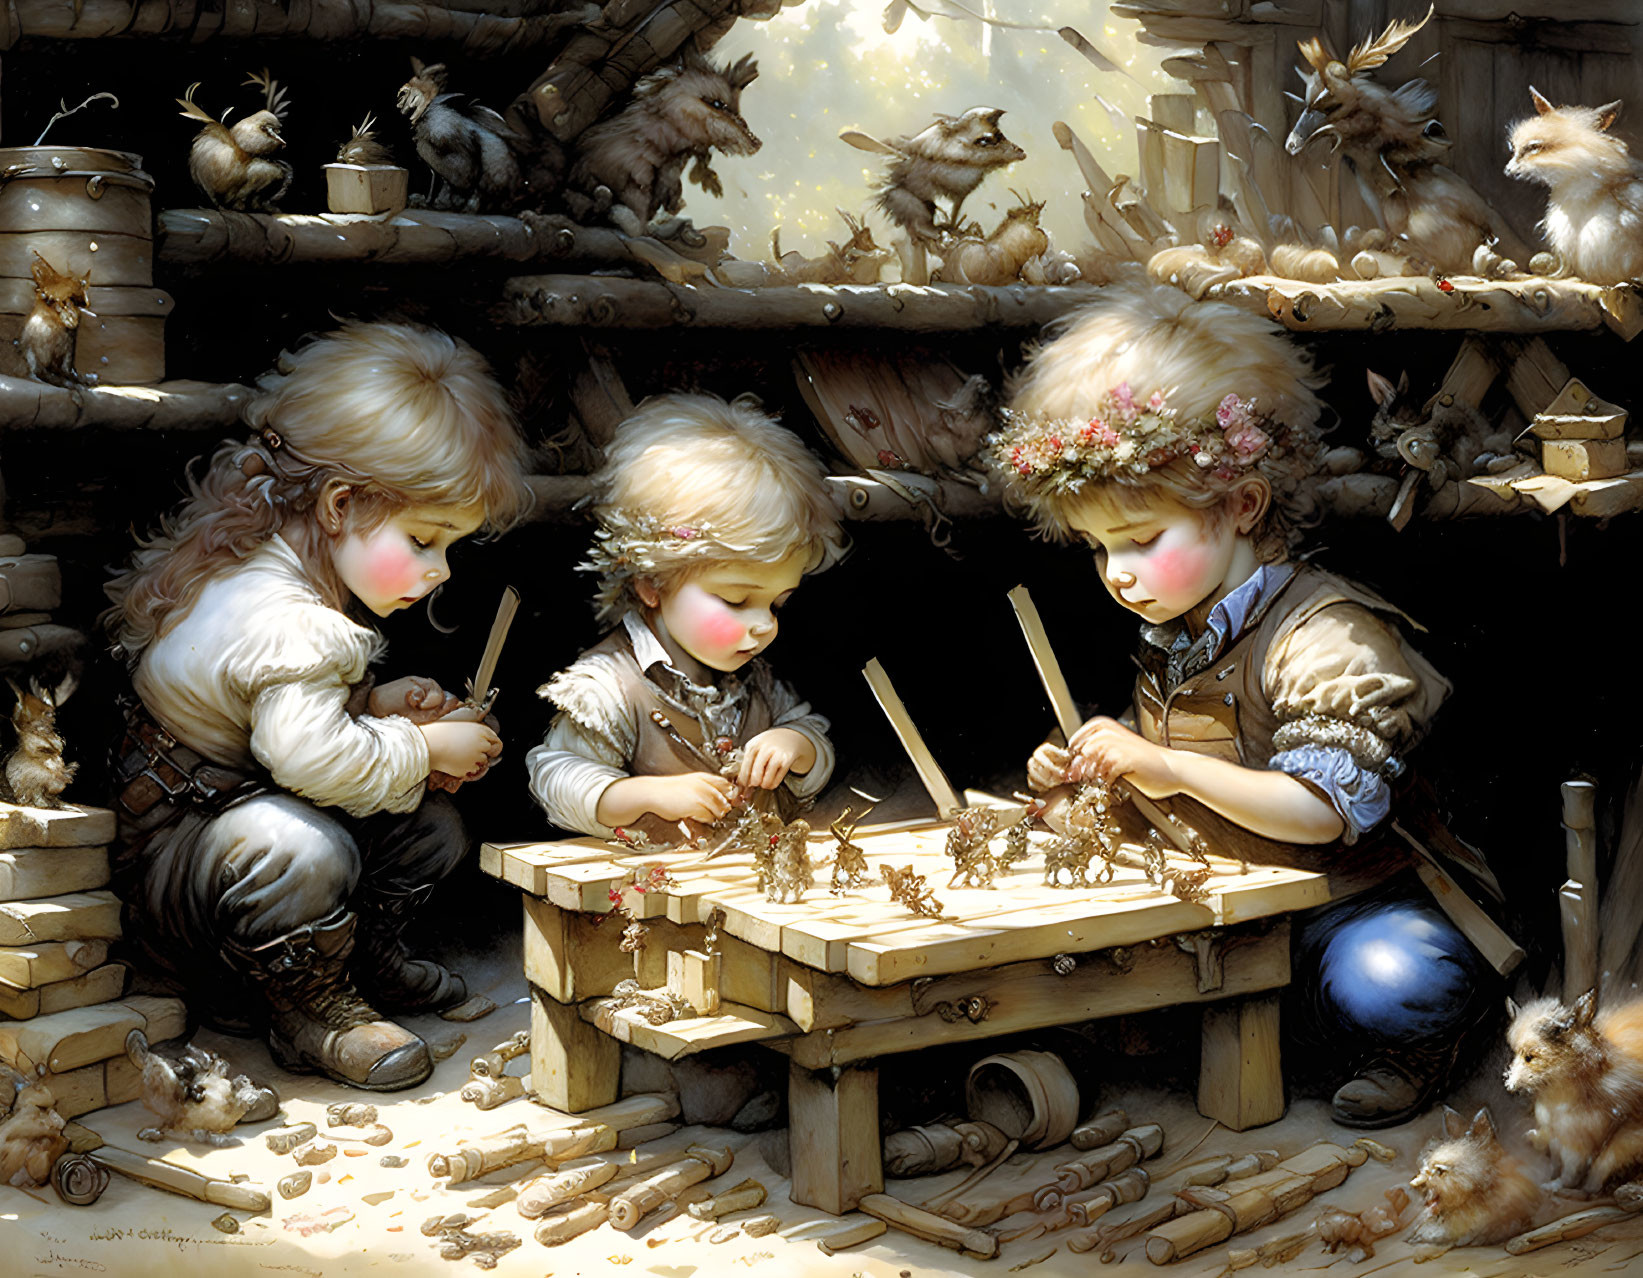 Children crafting tiny wooden structures in whimsical workshop with forest animals.